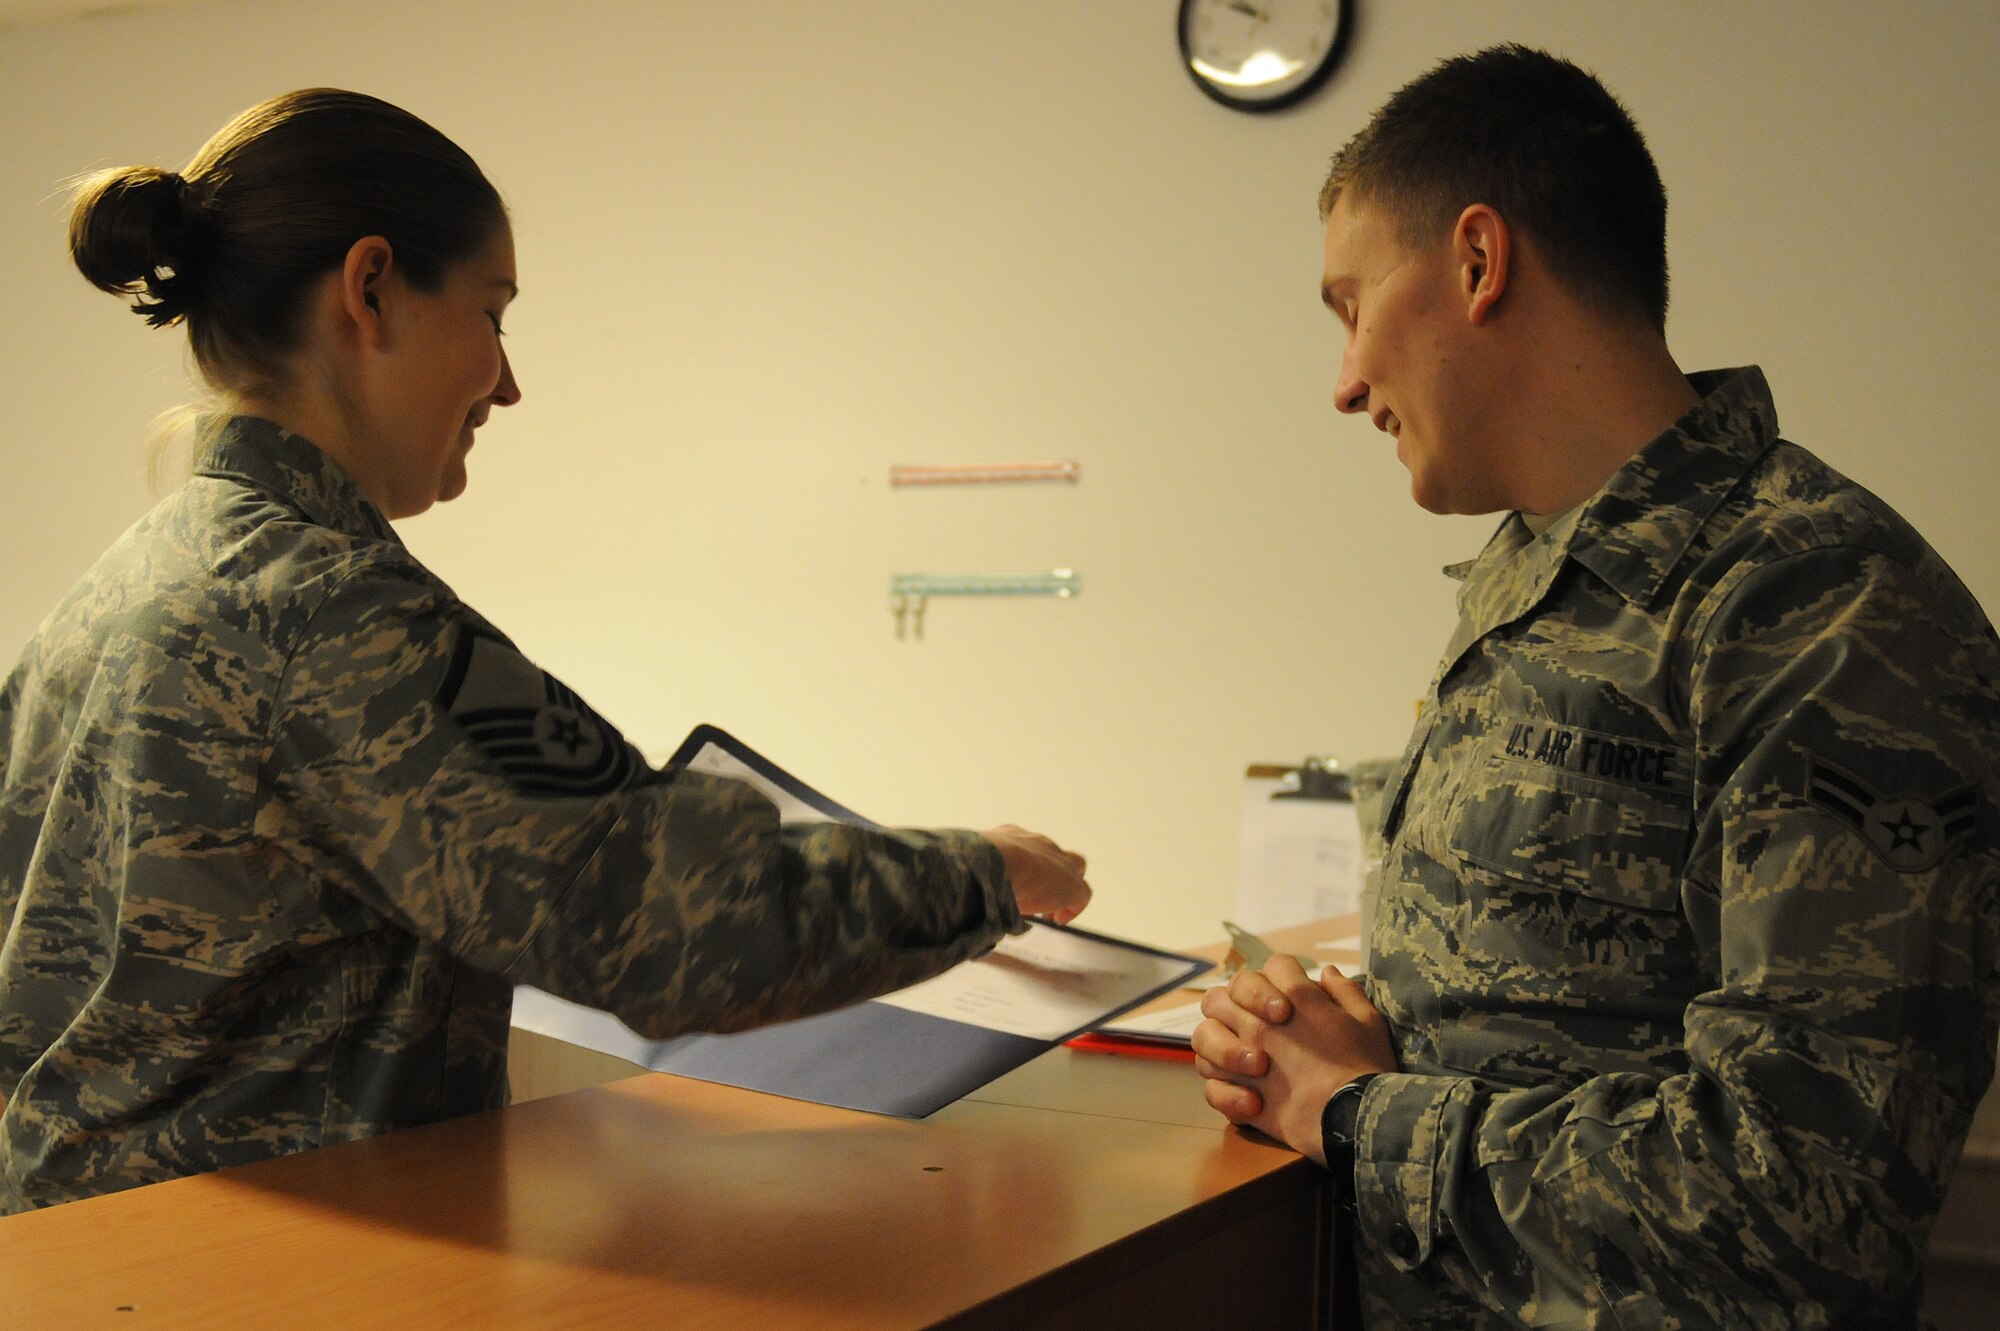 Master Sgt. Misti Rodriguez, 86th Civil Engineer Squadron unaccompanied housing superintendent, looks over housing paperwork for Airman 1st Class Zachary Bach, 2nd Air Postal Squadron knowledge operator, at the Dorm Reception Center on Ramstein Air Base, Germany, March 8, 2013. Rodriguez won the airman dorm leader superintendent award at this year’s U.S. Air Forces in Europe and Air Forces Africa first quarter awards ceremony. (U.S. Air Force photo/Airman 1st Class Holly Cook)